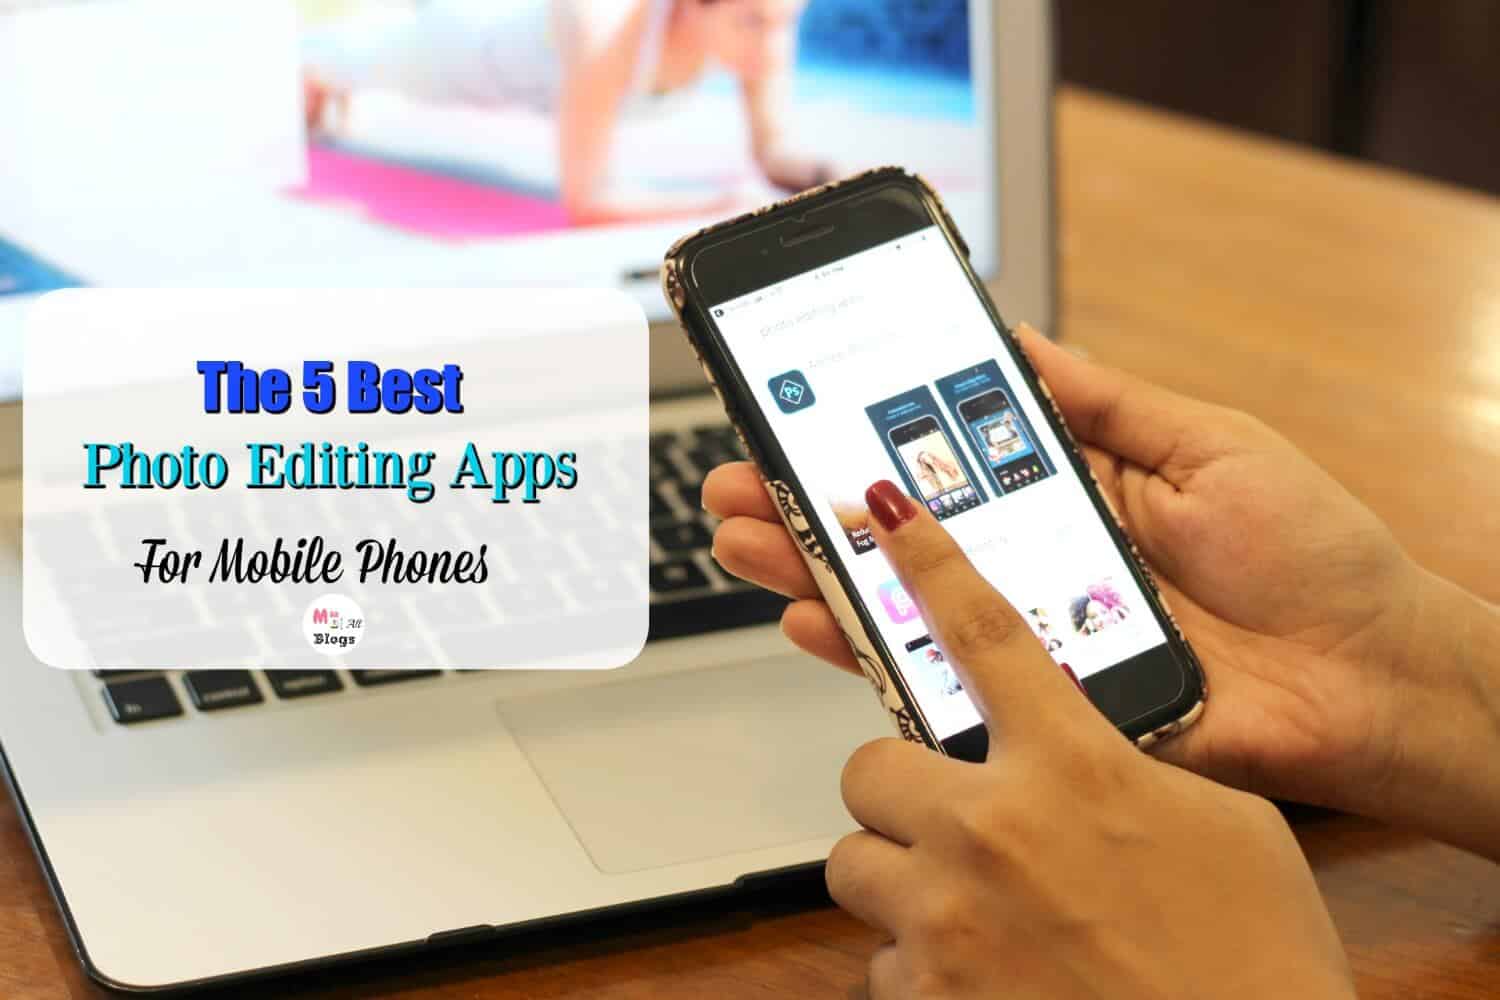 best mobile phone video editor